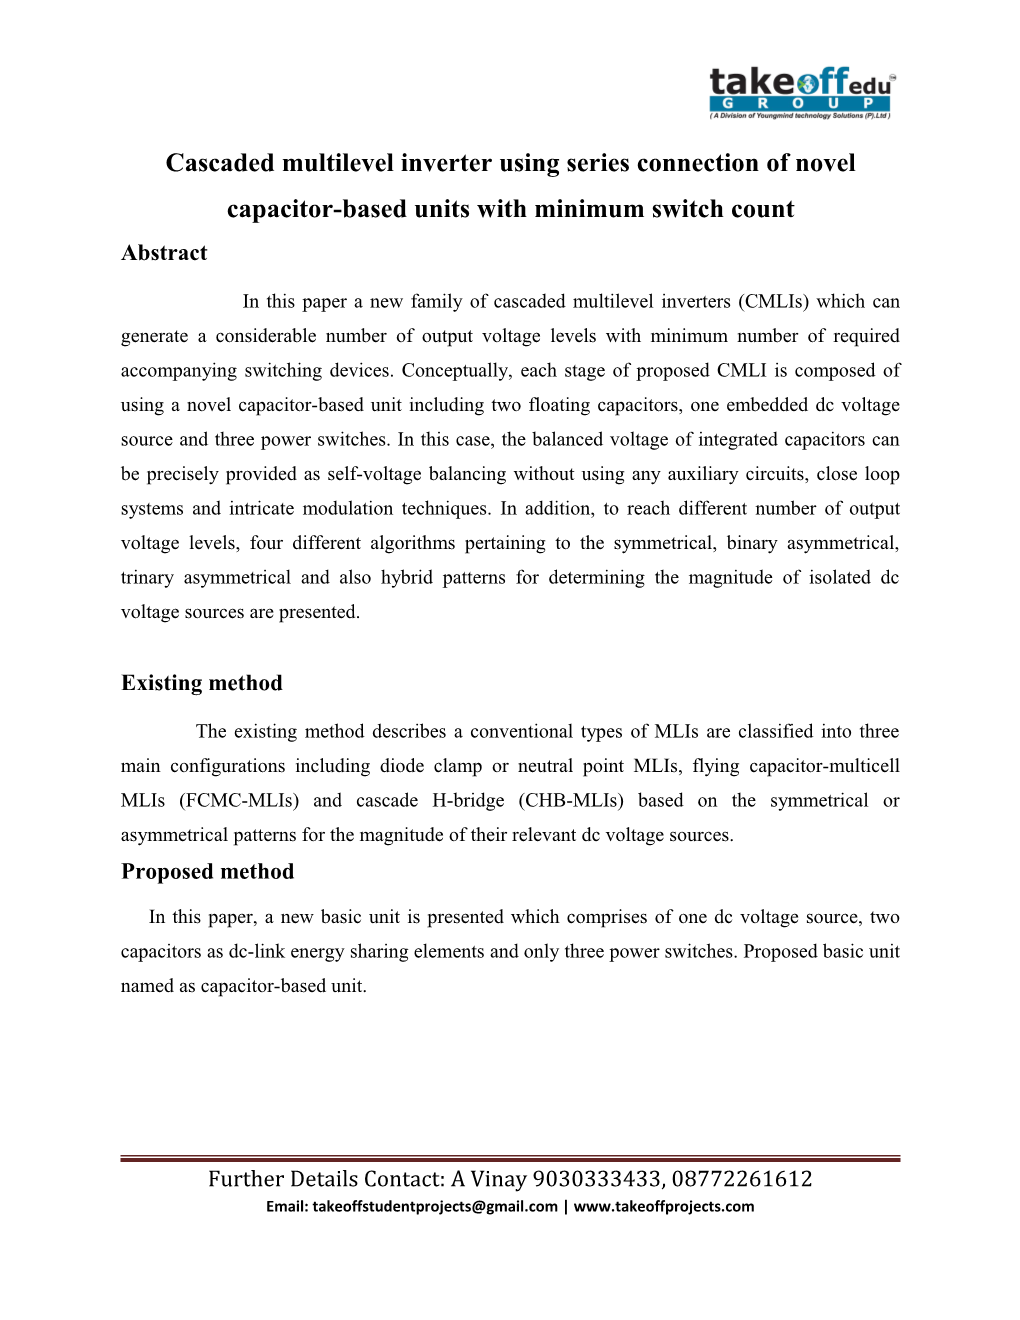 Cascaded Multilevel Inverter Using Series Connection of Novel Capacitor-Based Units With